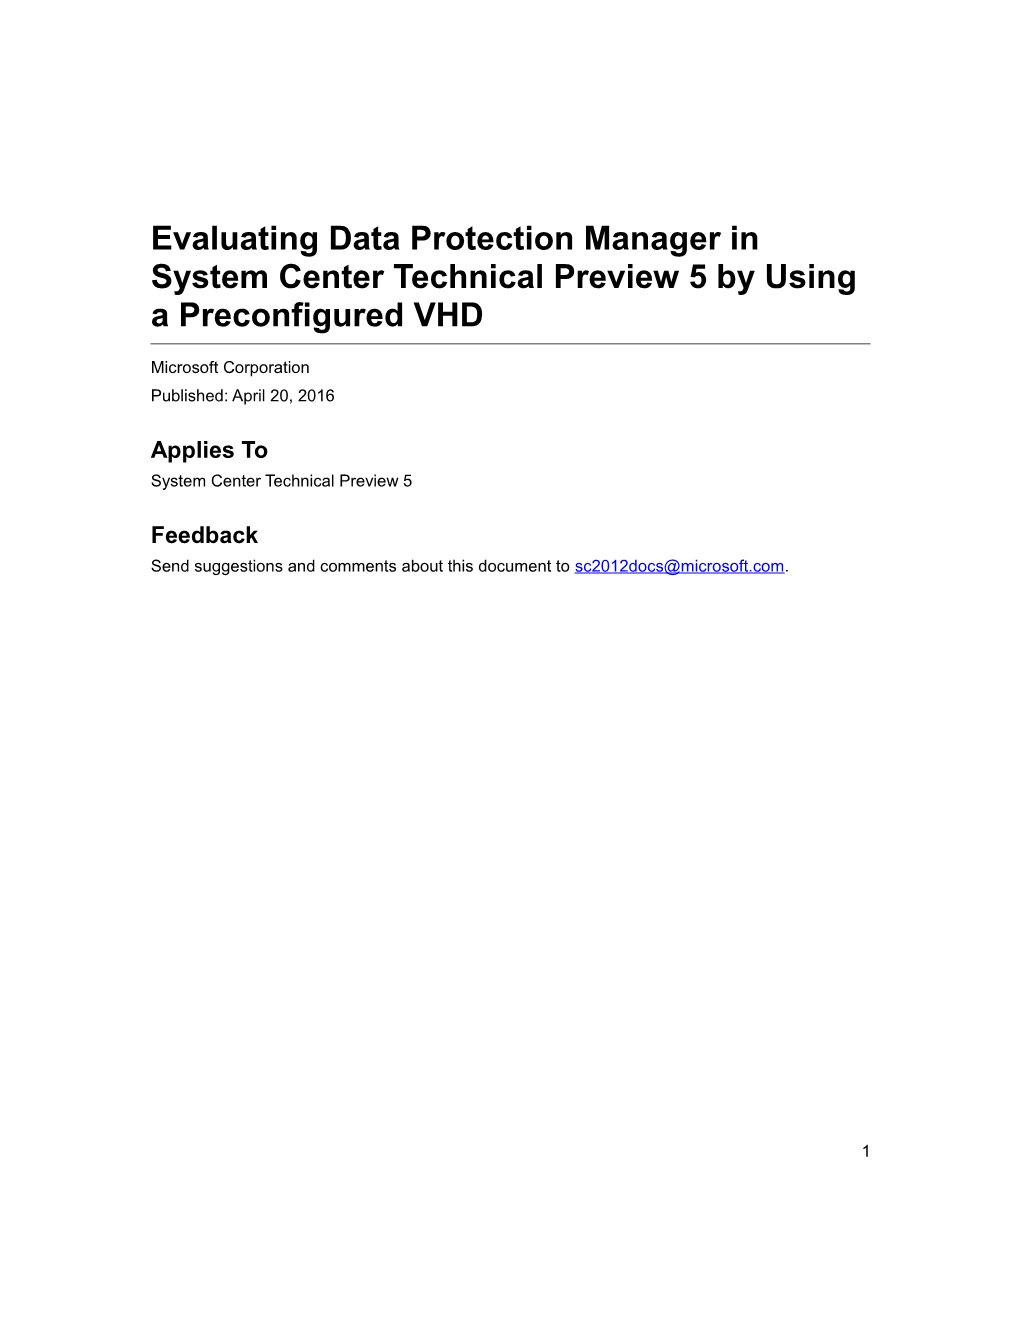 Evaluating Data Protection Manager in System Center Technical Preview 5 by Using A